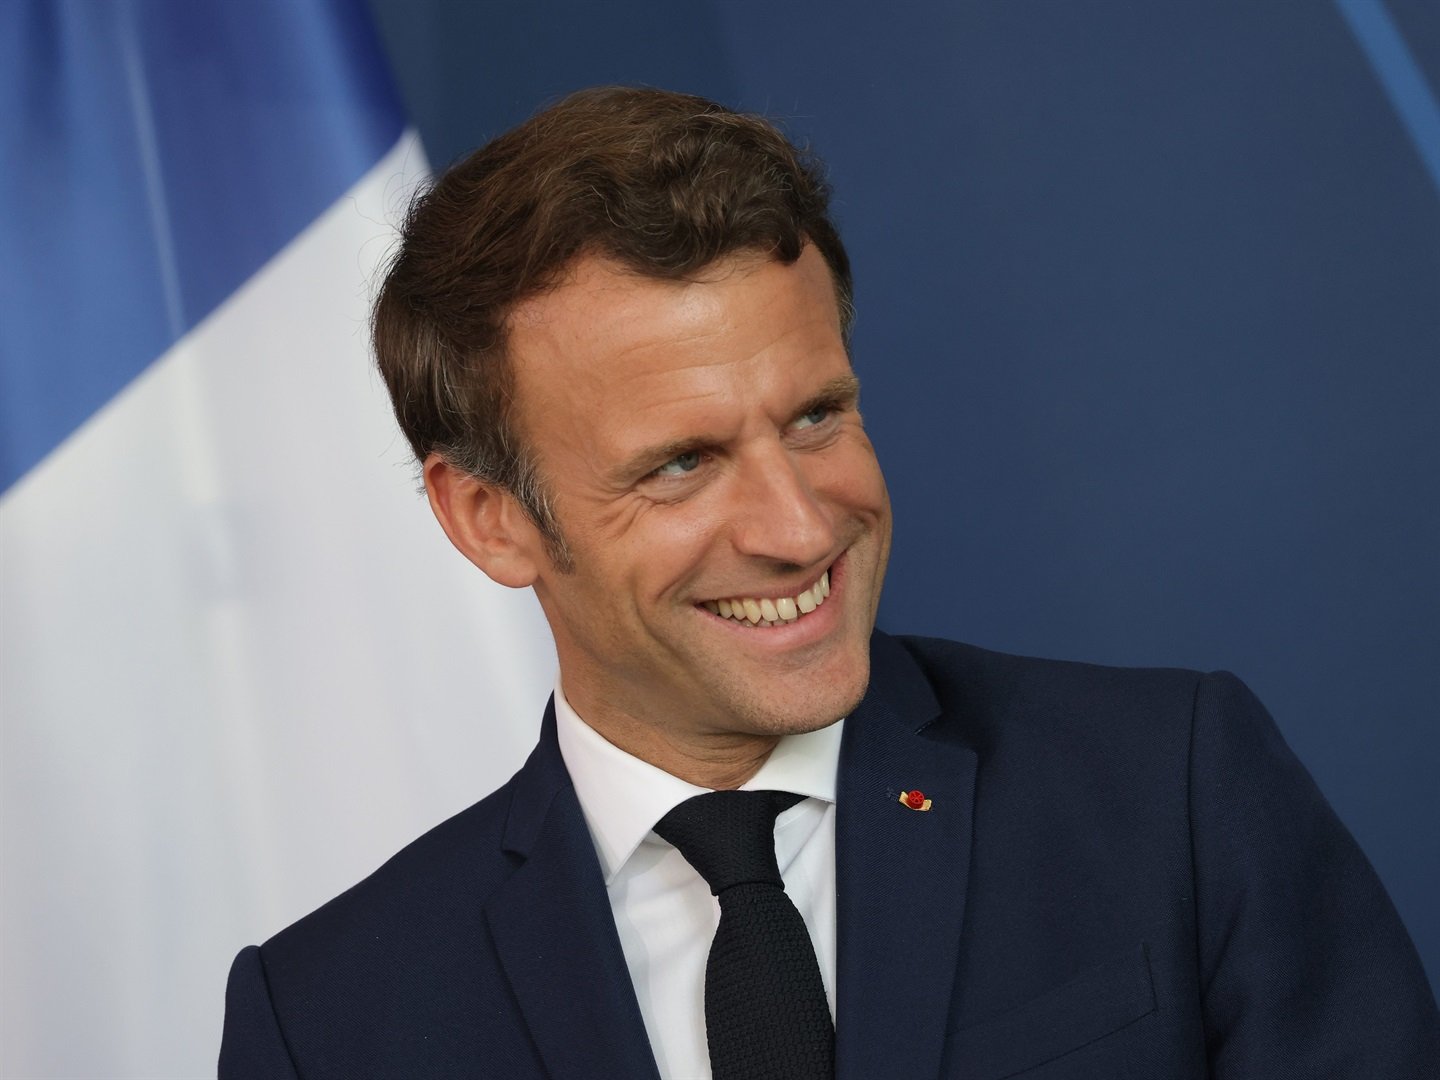 macron-starts-second-term-with-challenges-mounting-news24